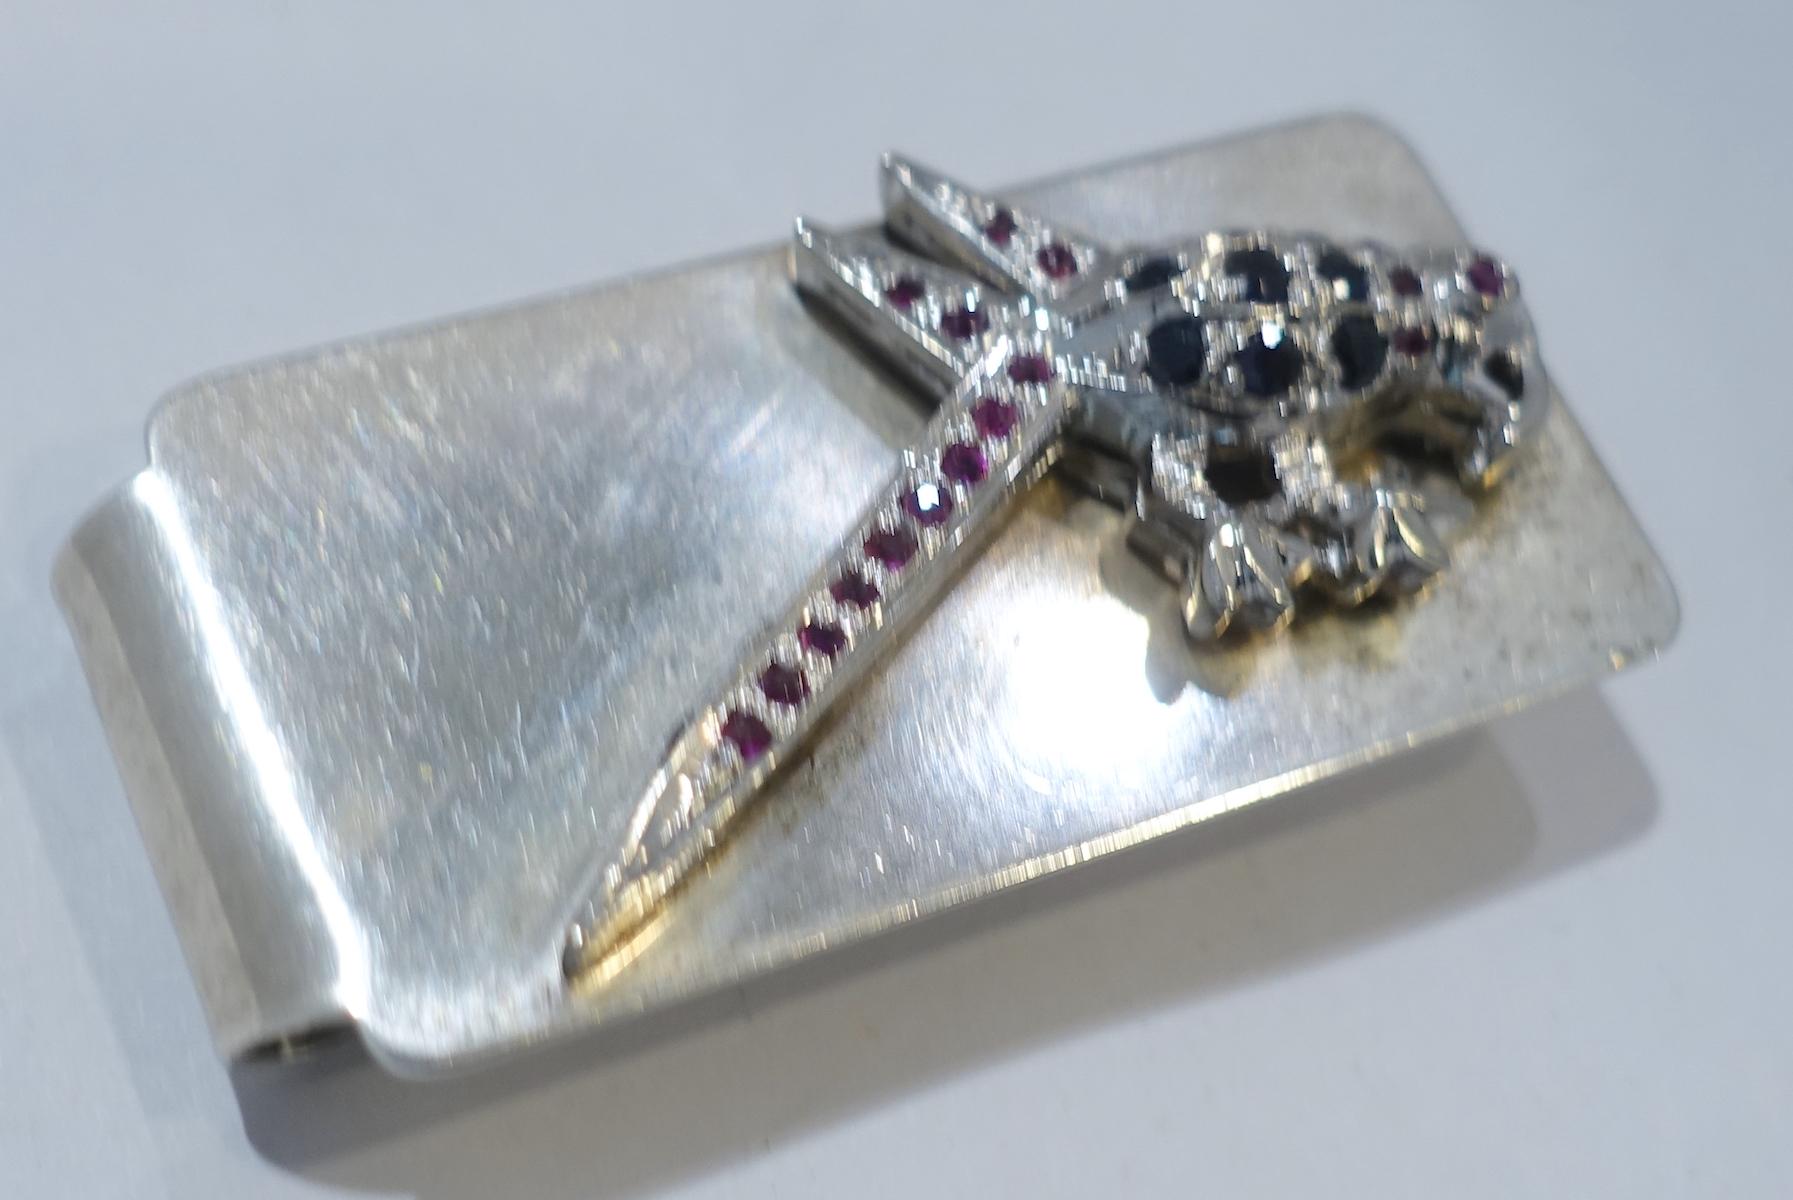 This vintage sterling silver money clip has a 3-dimensional perched bird with black and red crystals.  In excellent condition, this money clip measures 2” x 1”.